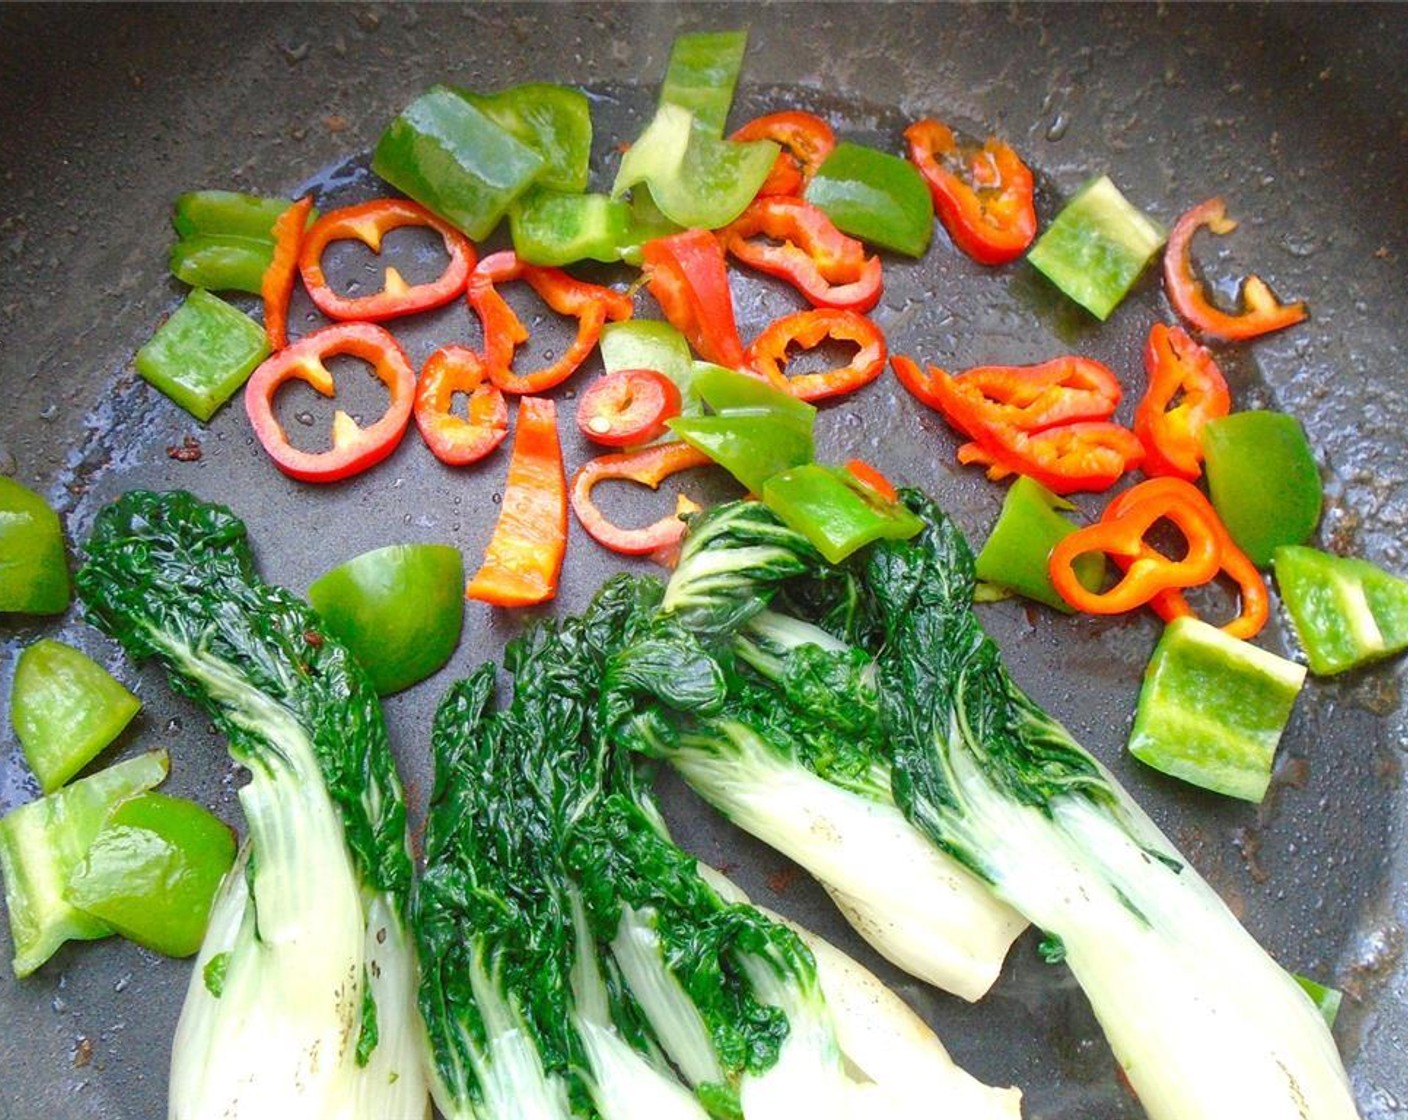 step 10 Add blanched bok choy, Green Bell Pepper (1), and Red Bell Pepper (1) to pan. Stir fry 1 minute.